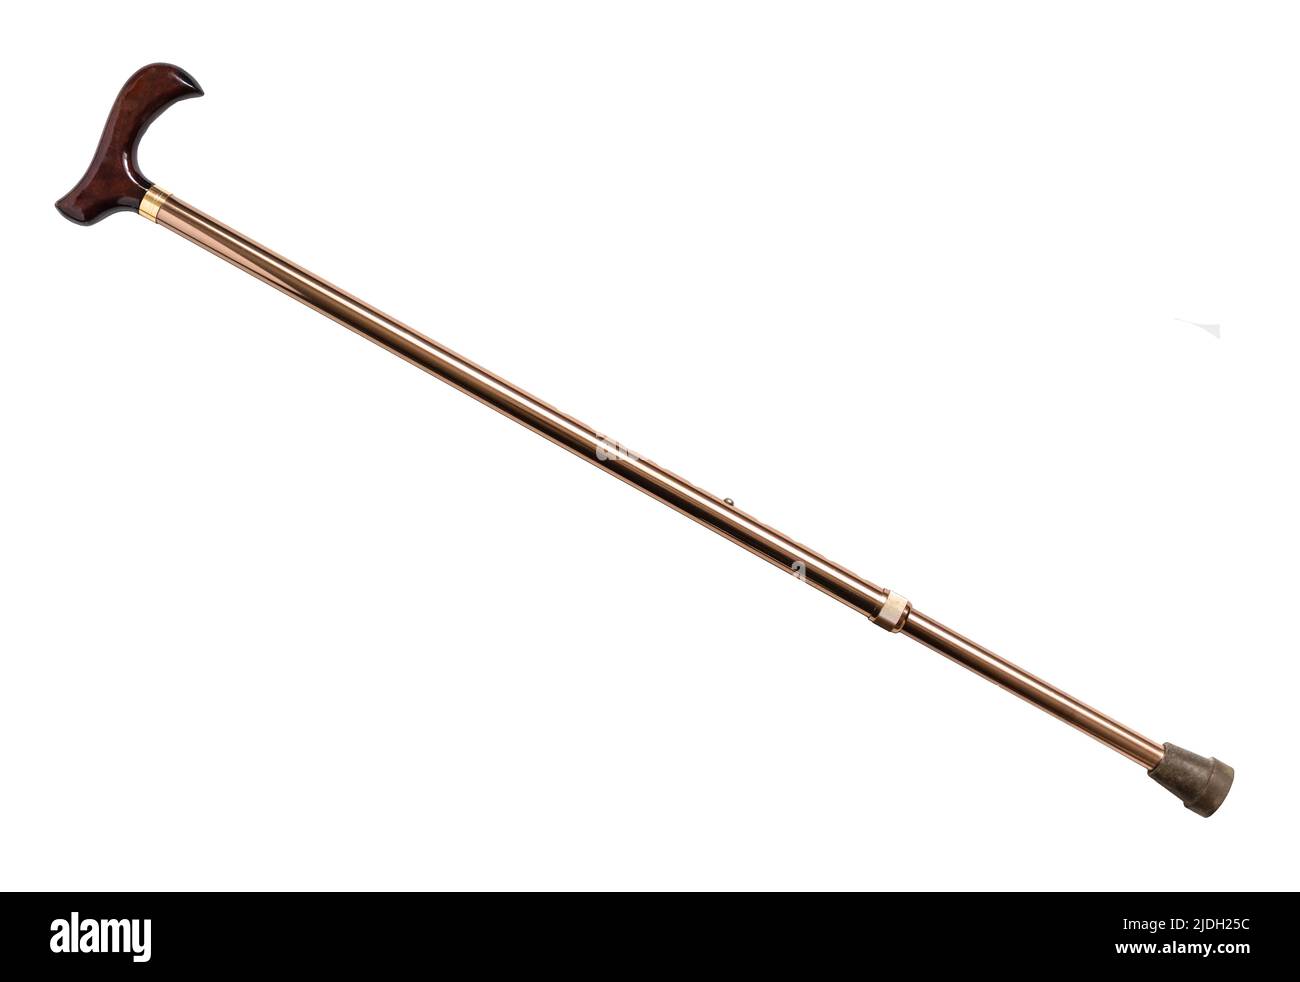 adjustable copper walking stick with wooden derby handle cutout on white background Stock Photo